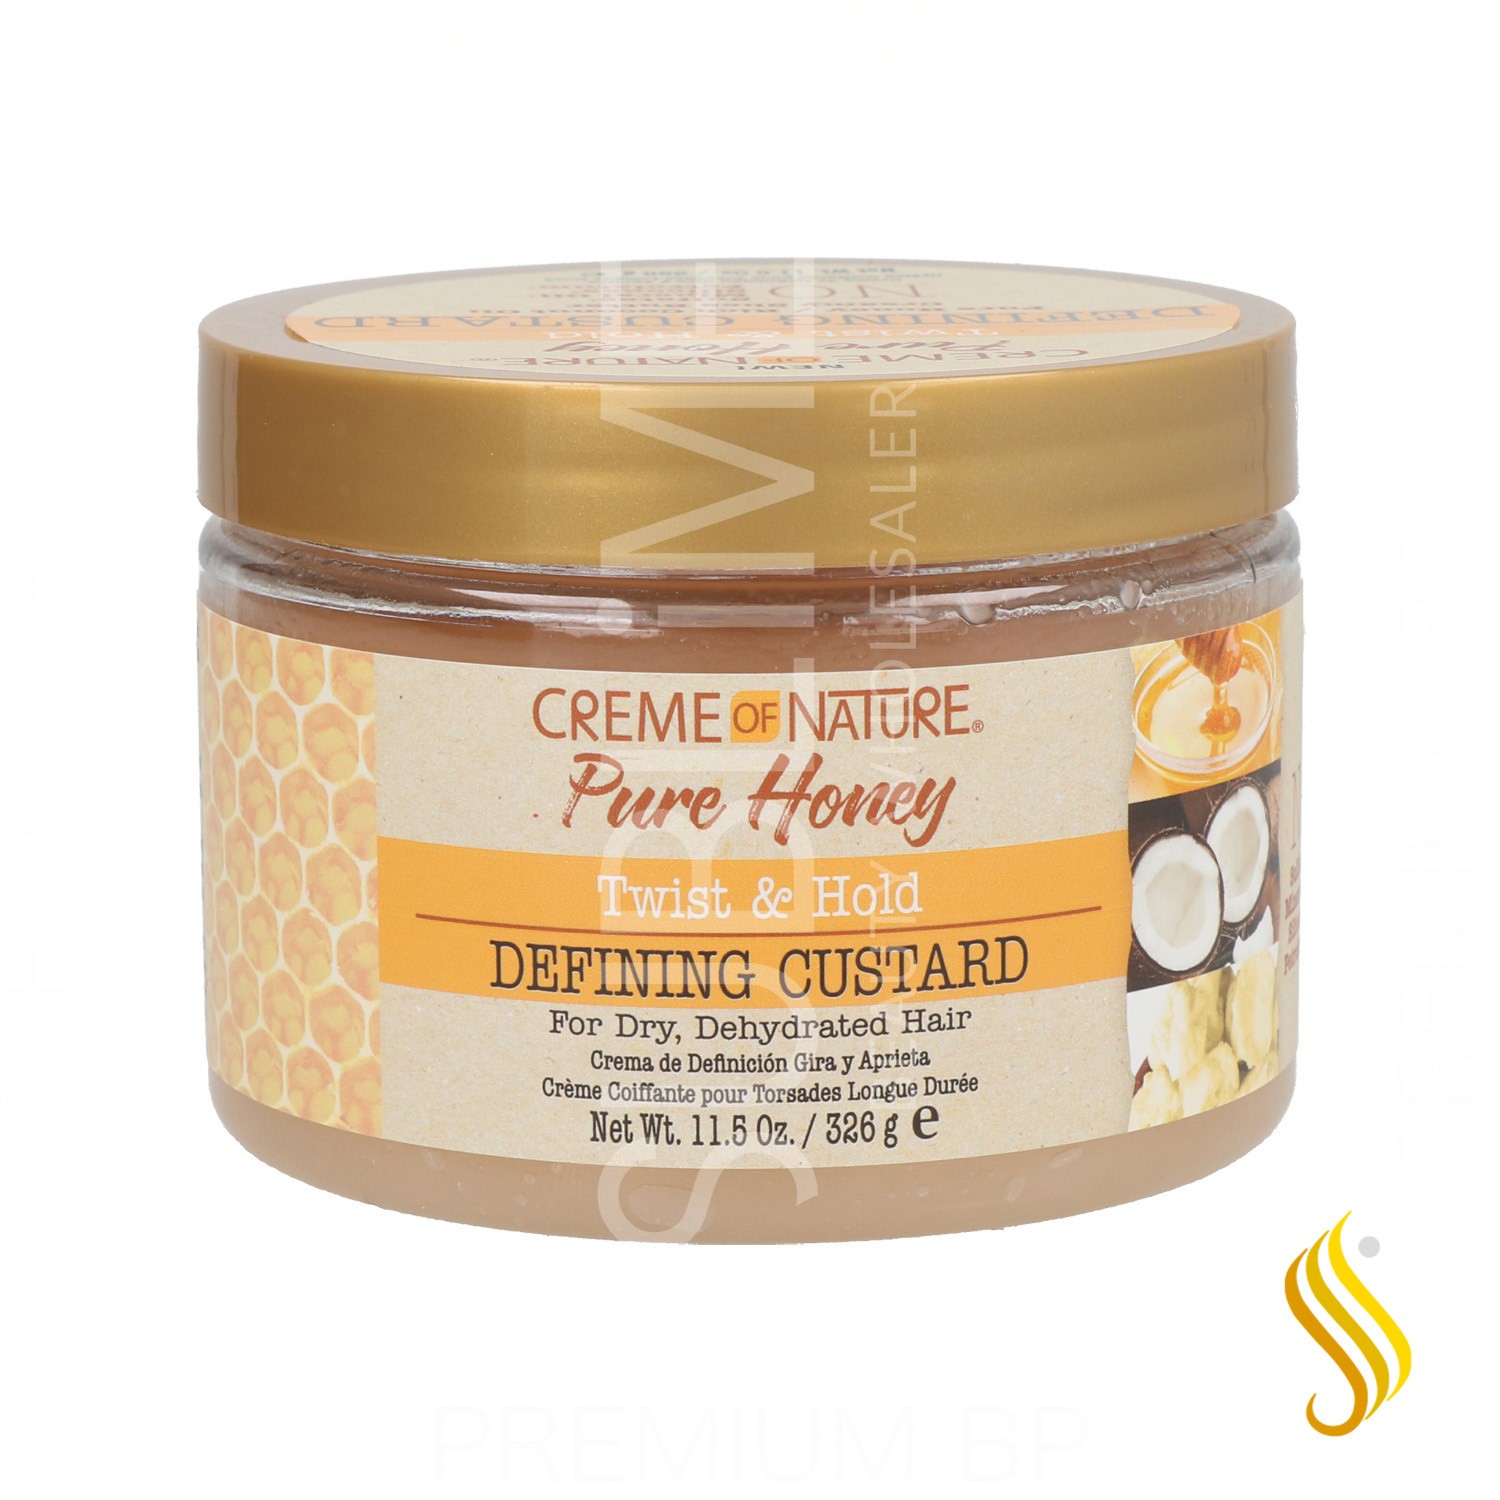 Creme Of Nature Pure Honey Twisted & Hold Defining Custard 326 g